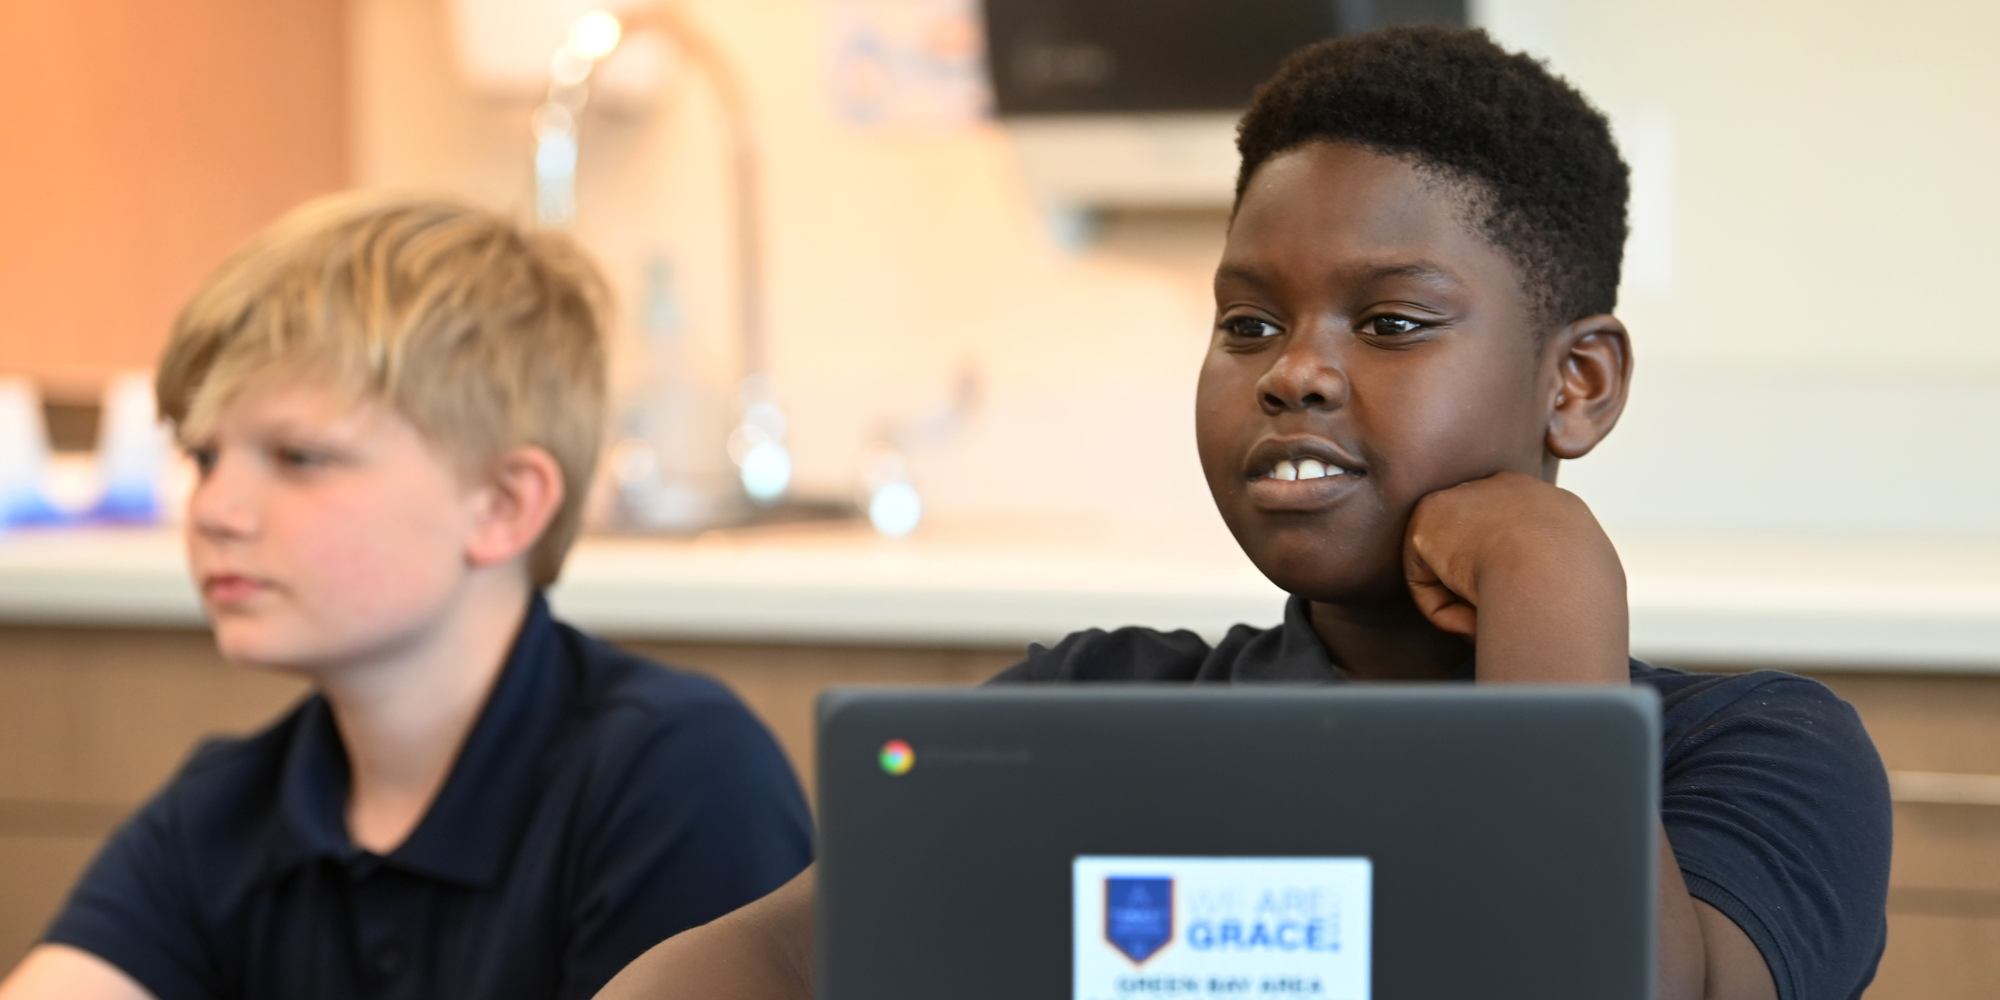 GRACE student on laptop in classroom